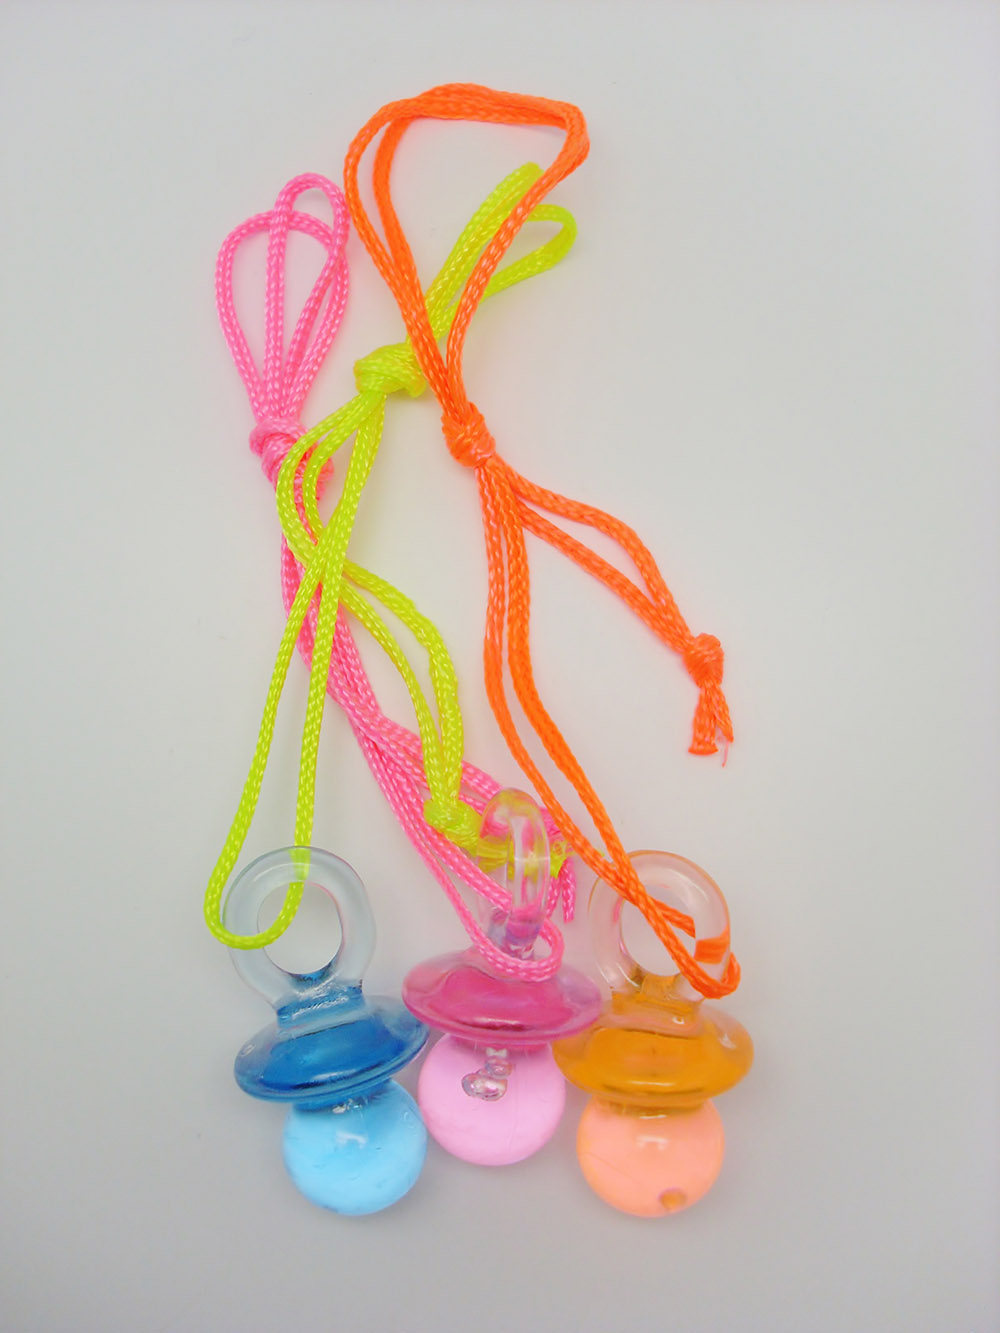 12 Pcs Plastic Soother Key Chain